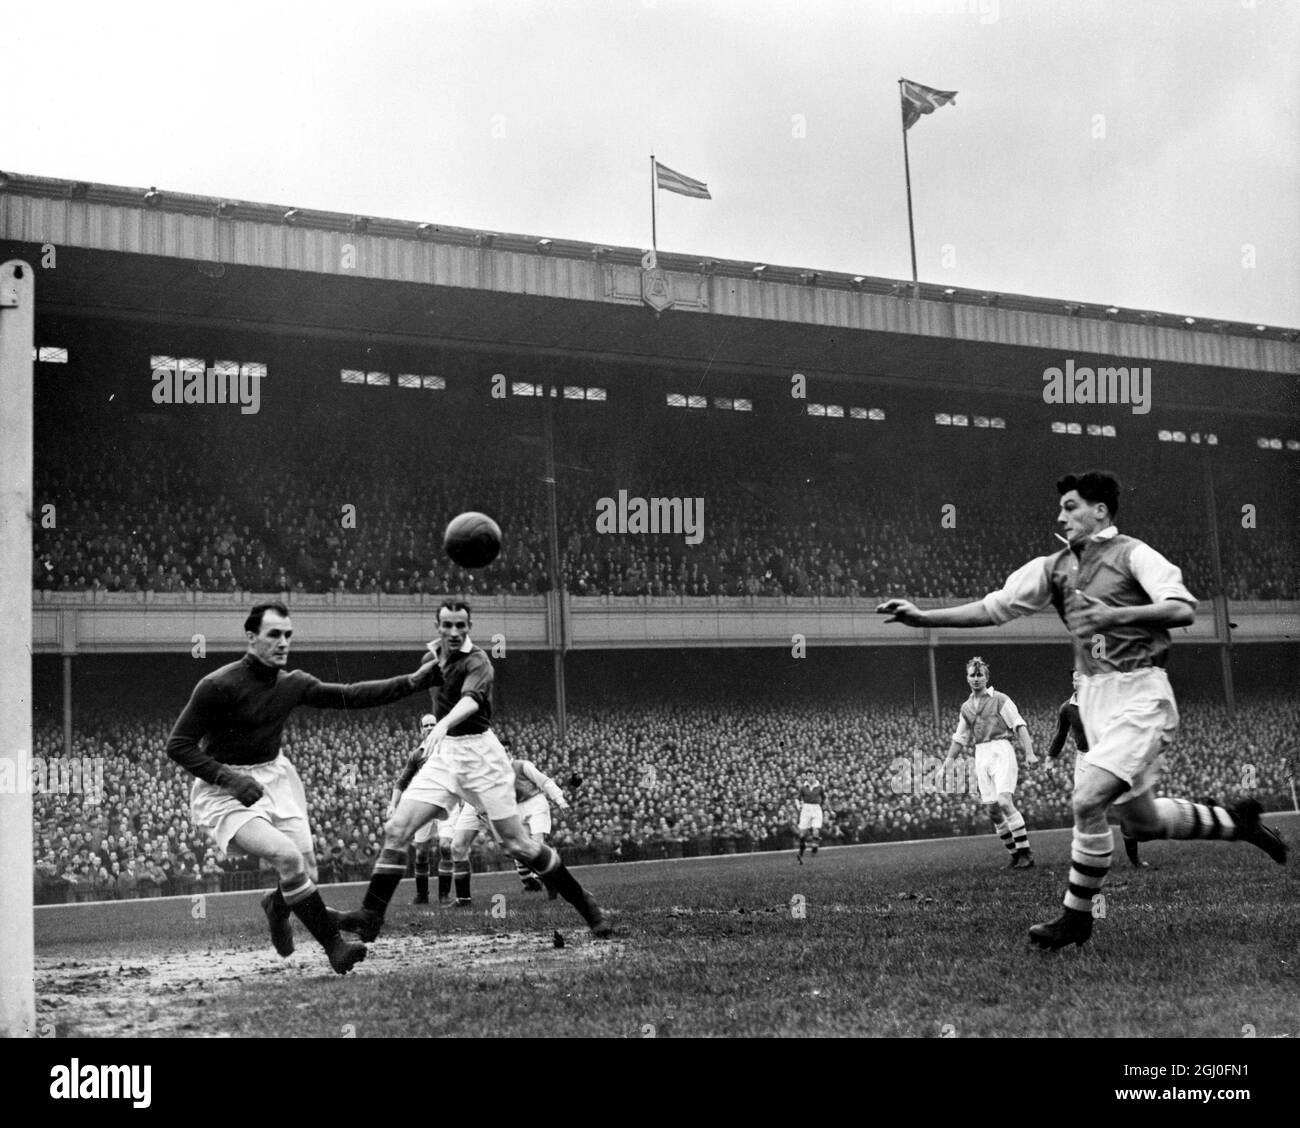 Arsenal v Manchester United Cliff Holton, the Arsenal centre forward (on right) follows up his header, which is cleared by Jack Crompton (Manchester United goalkeeper) while Chilton, the Manchester United centre half is seen in close attendance. 8th December 1951. Stock Photo